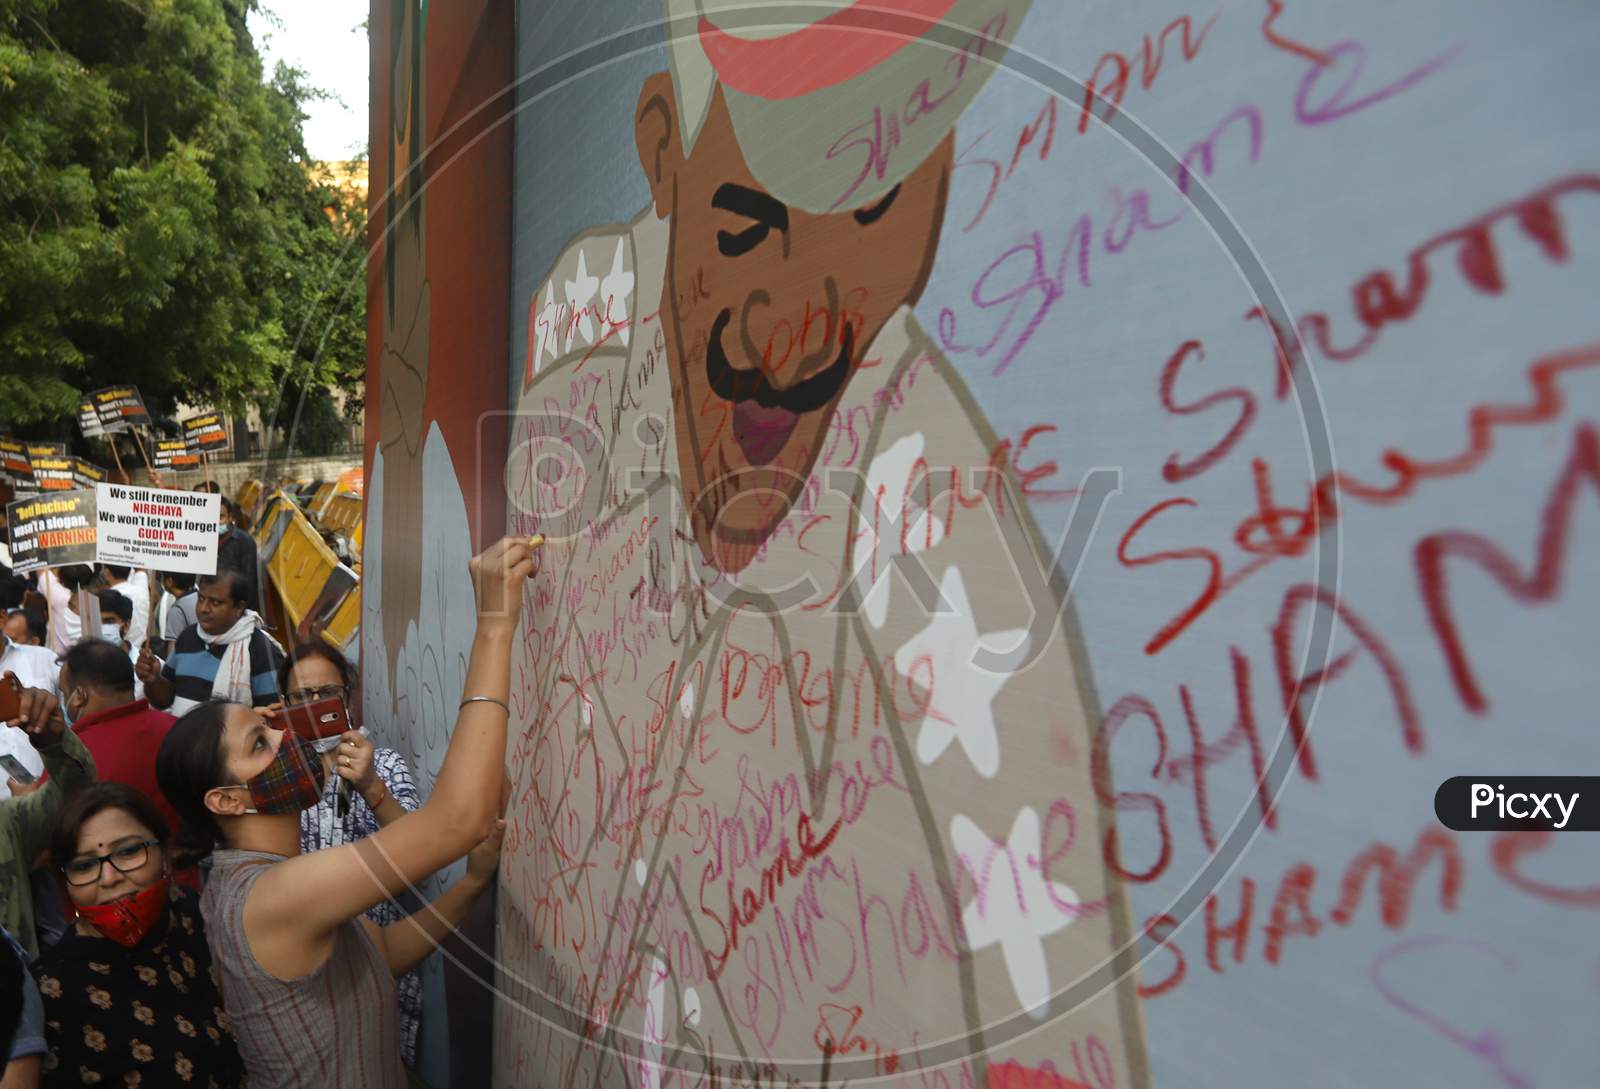 A demonstrator uses a lipstick to write on a billboard during a protest after the death of a rape victim, in New Delhi, India, October 2, 2020.